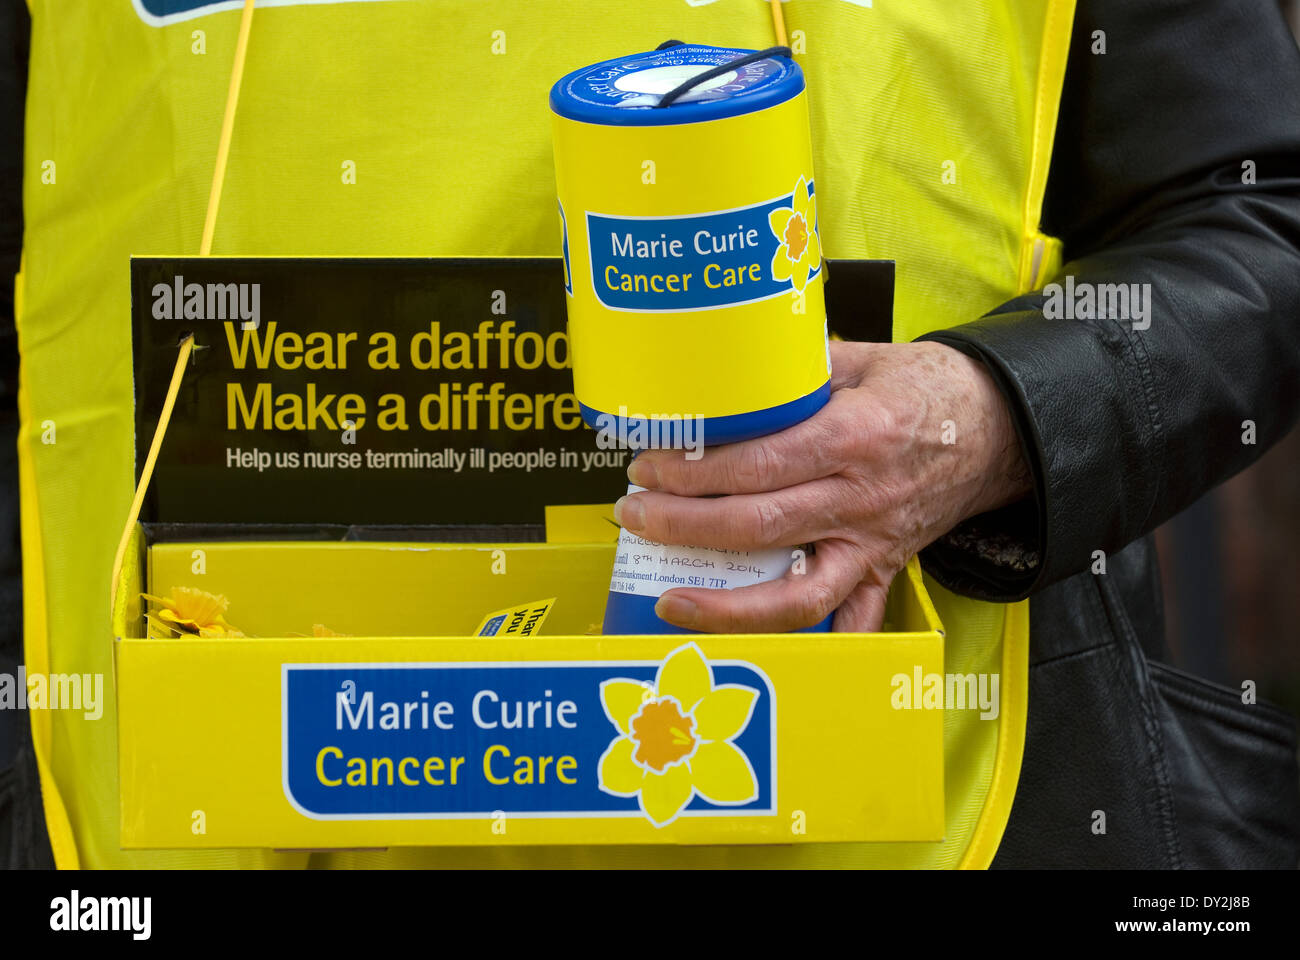 Woman collecting money for Marie Curie Cancer Care charity, High Street, Alton, Hampshire, UK. Stock Photo